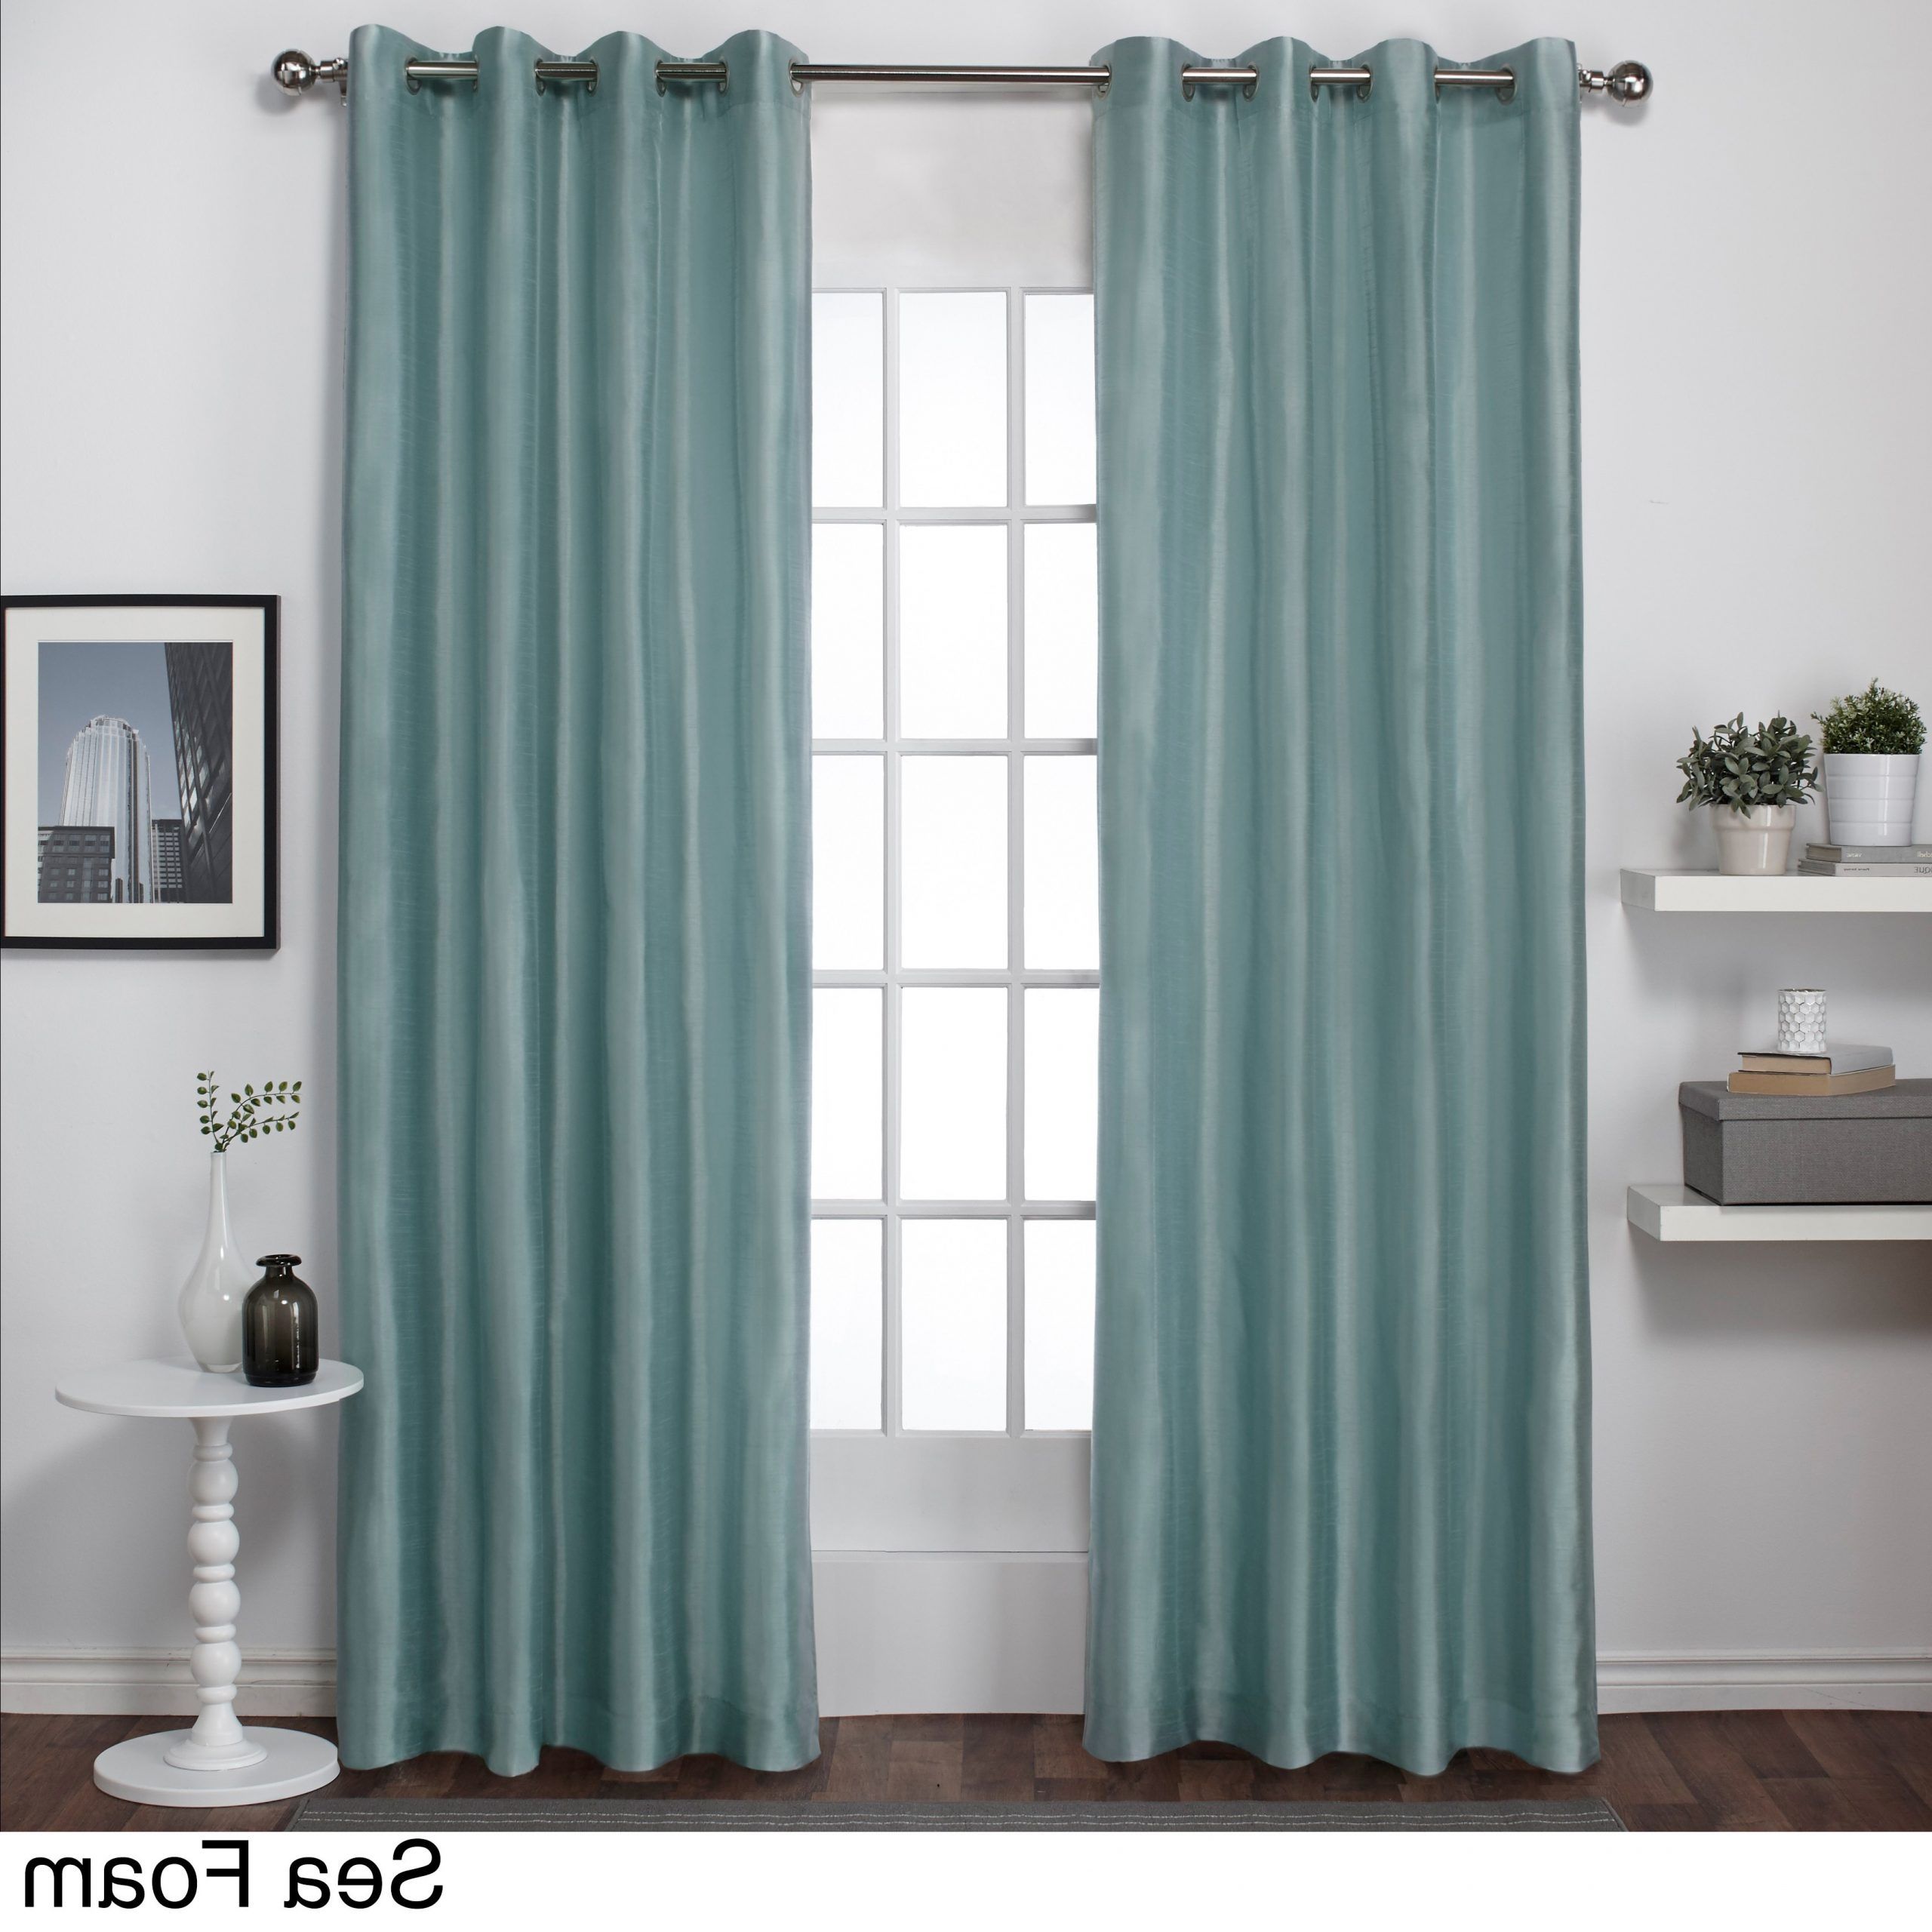 Well Known Ati Home Chatra Faux Silk Grommet Top Panel Curtains – N/a With Copper Grove Fulgence Faux Silk Grommet Top Panel Curtains (View 3 of 20)